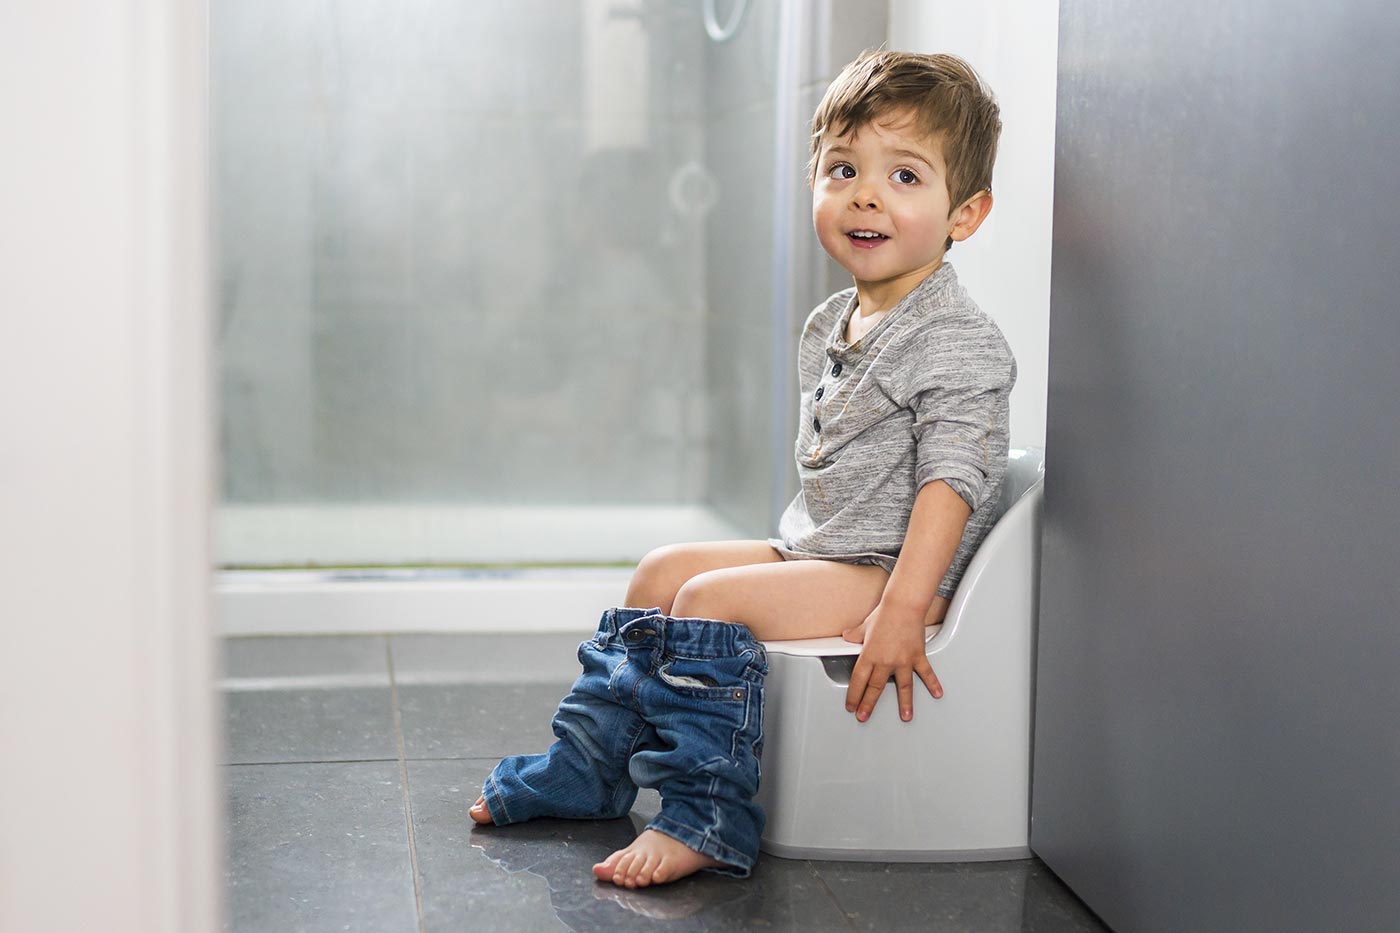 How to Get Toddler to Tell You When They Need to Potty